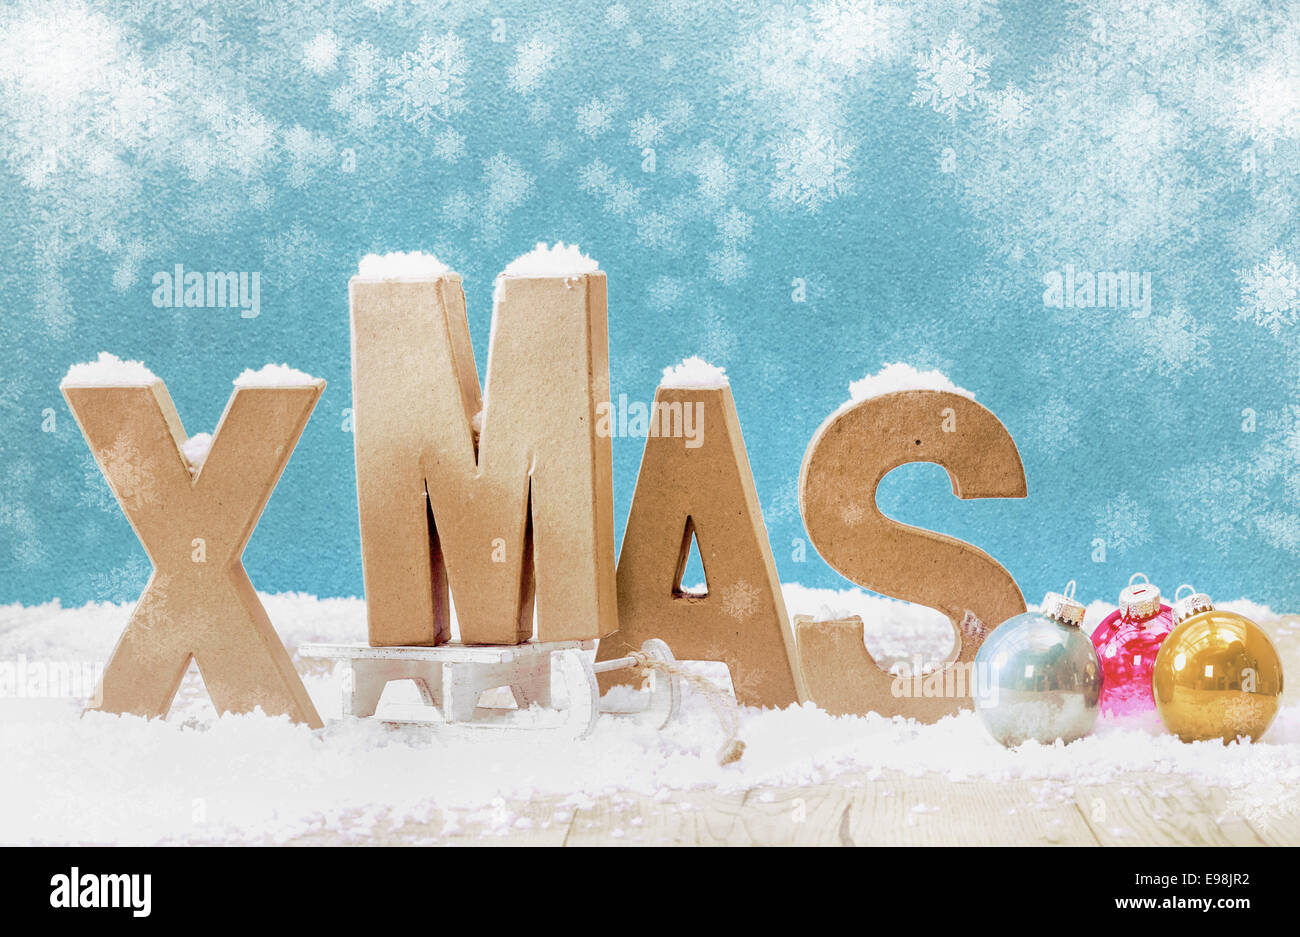 Cold wintry Xmas background with wooden letters for Xmas in snow with colorful Christmas baubles under falling snowflakes on a cool blue background with copyspace Stock Photo